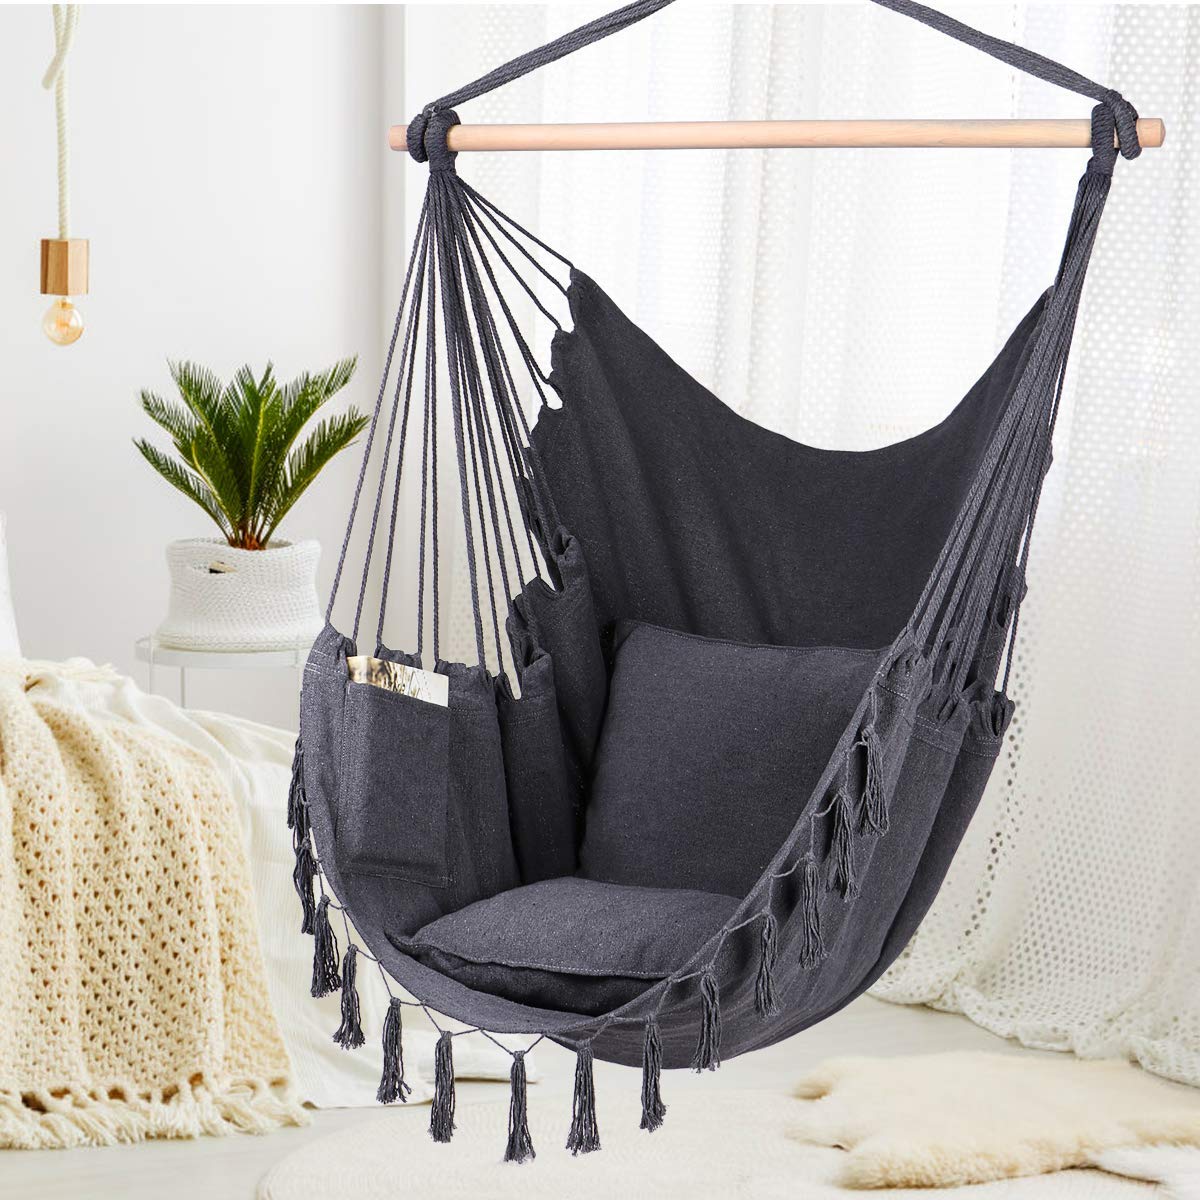  Macrame Hammock Swing Chair With Two Pillows/Carry bag/Hardware